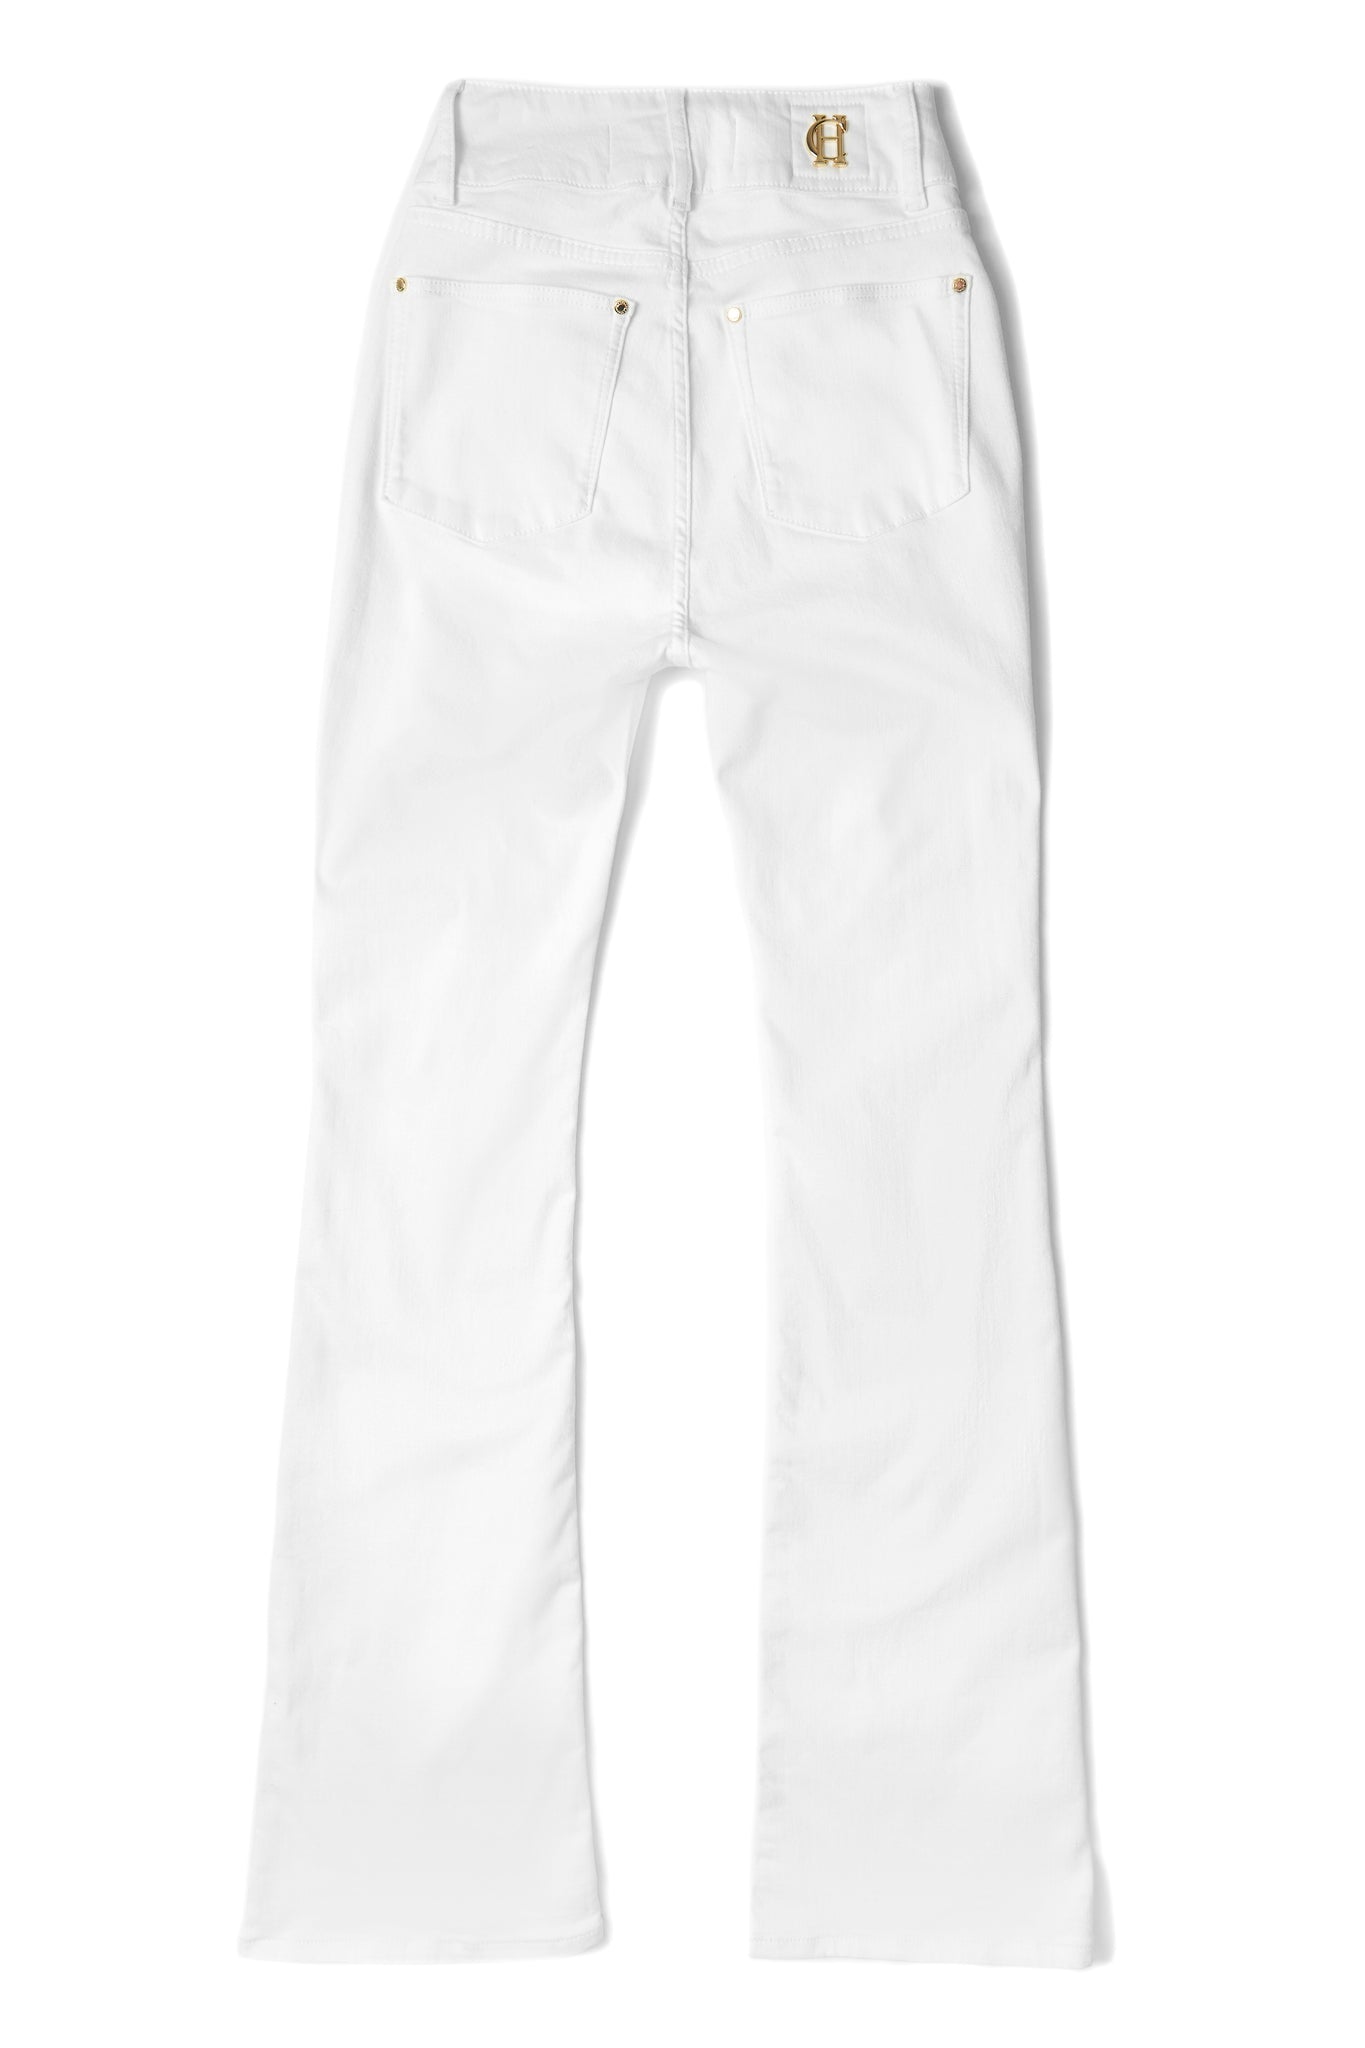 back of womens high rise white flared jean with centre front zip fly fastening with two open pockets at the front and back and gold hardware on back waistband